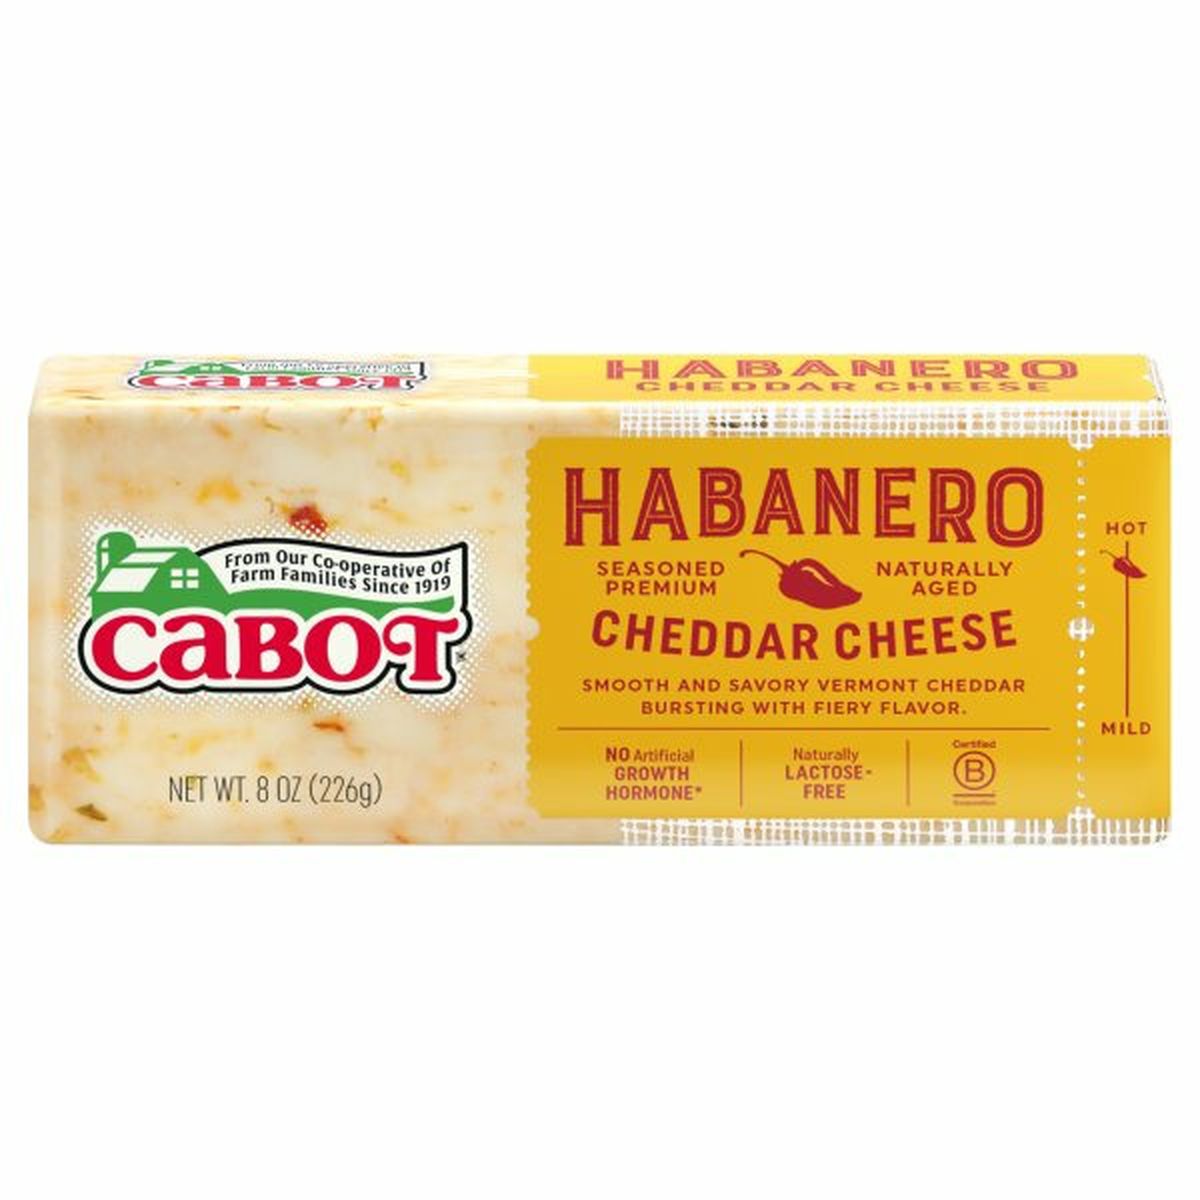 Calories in Cabot Cheese, Habanero Cheddar